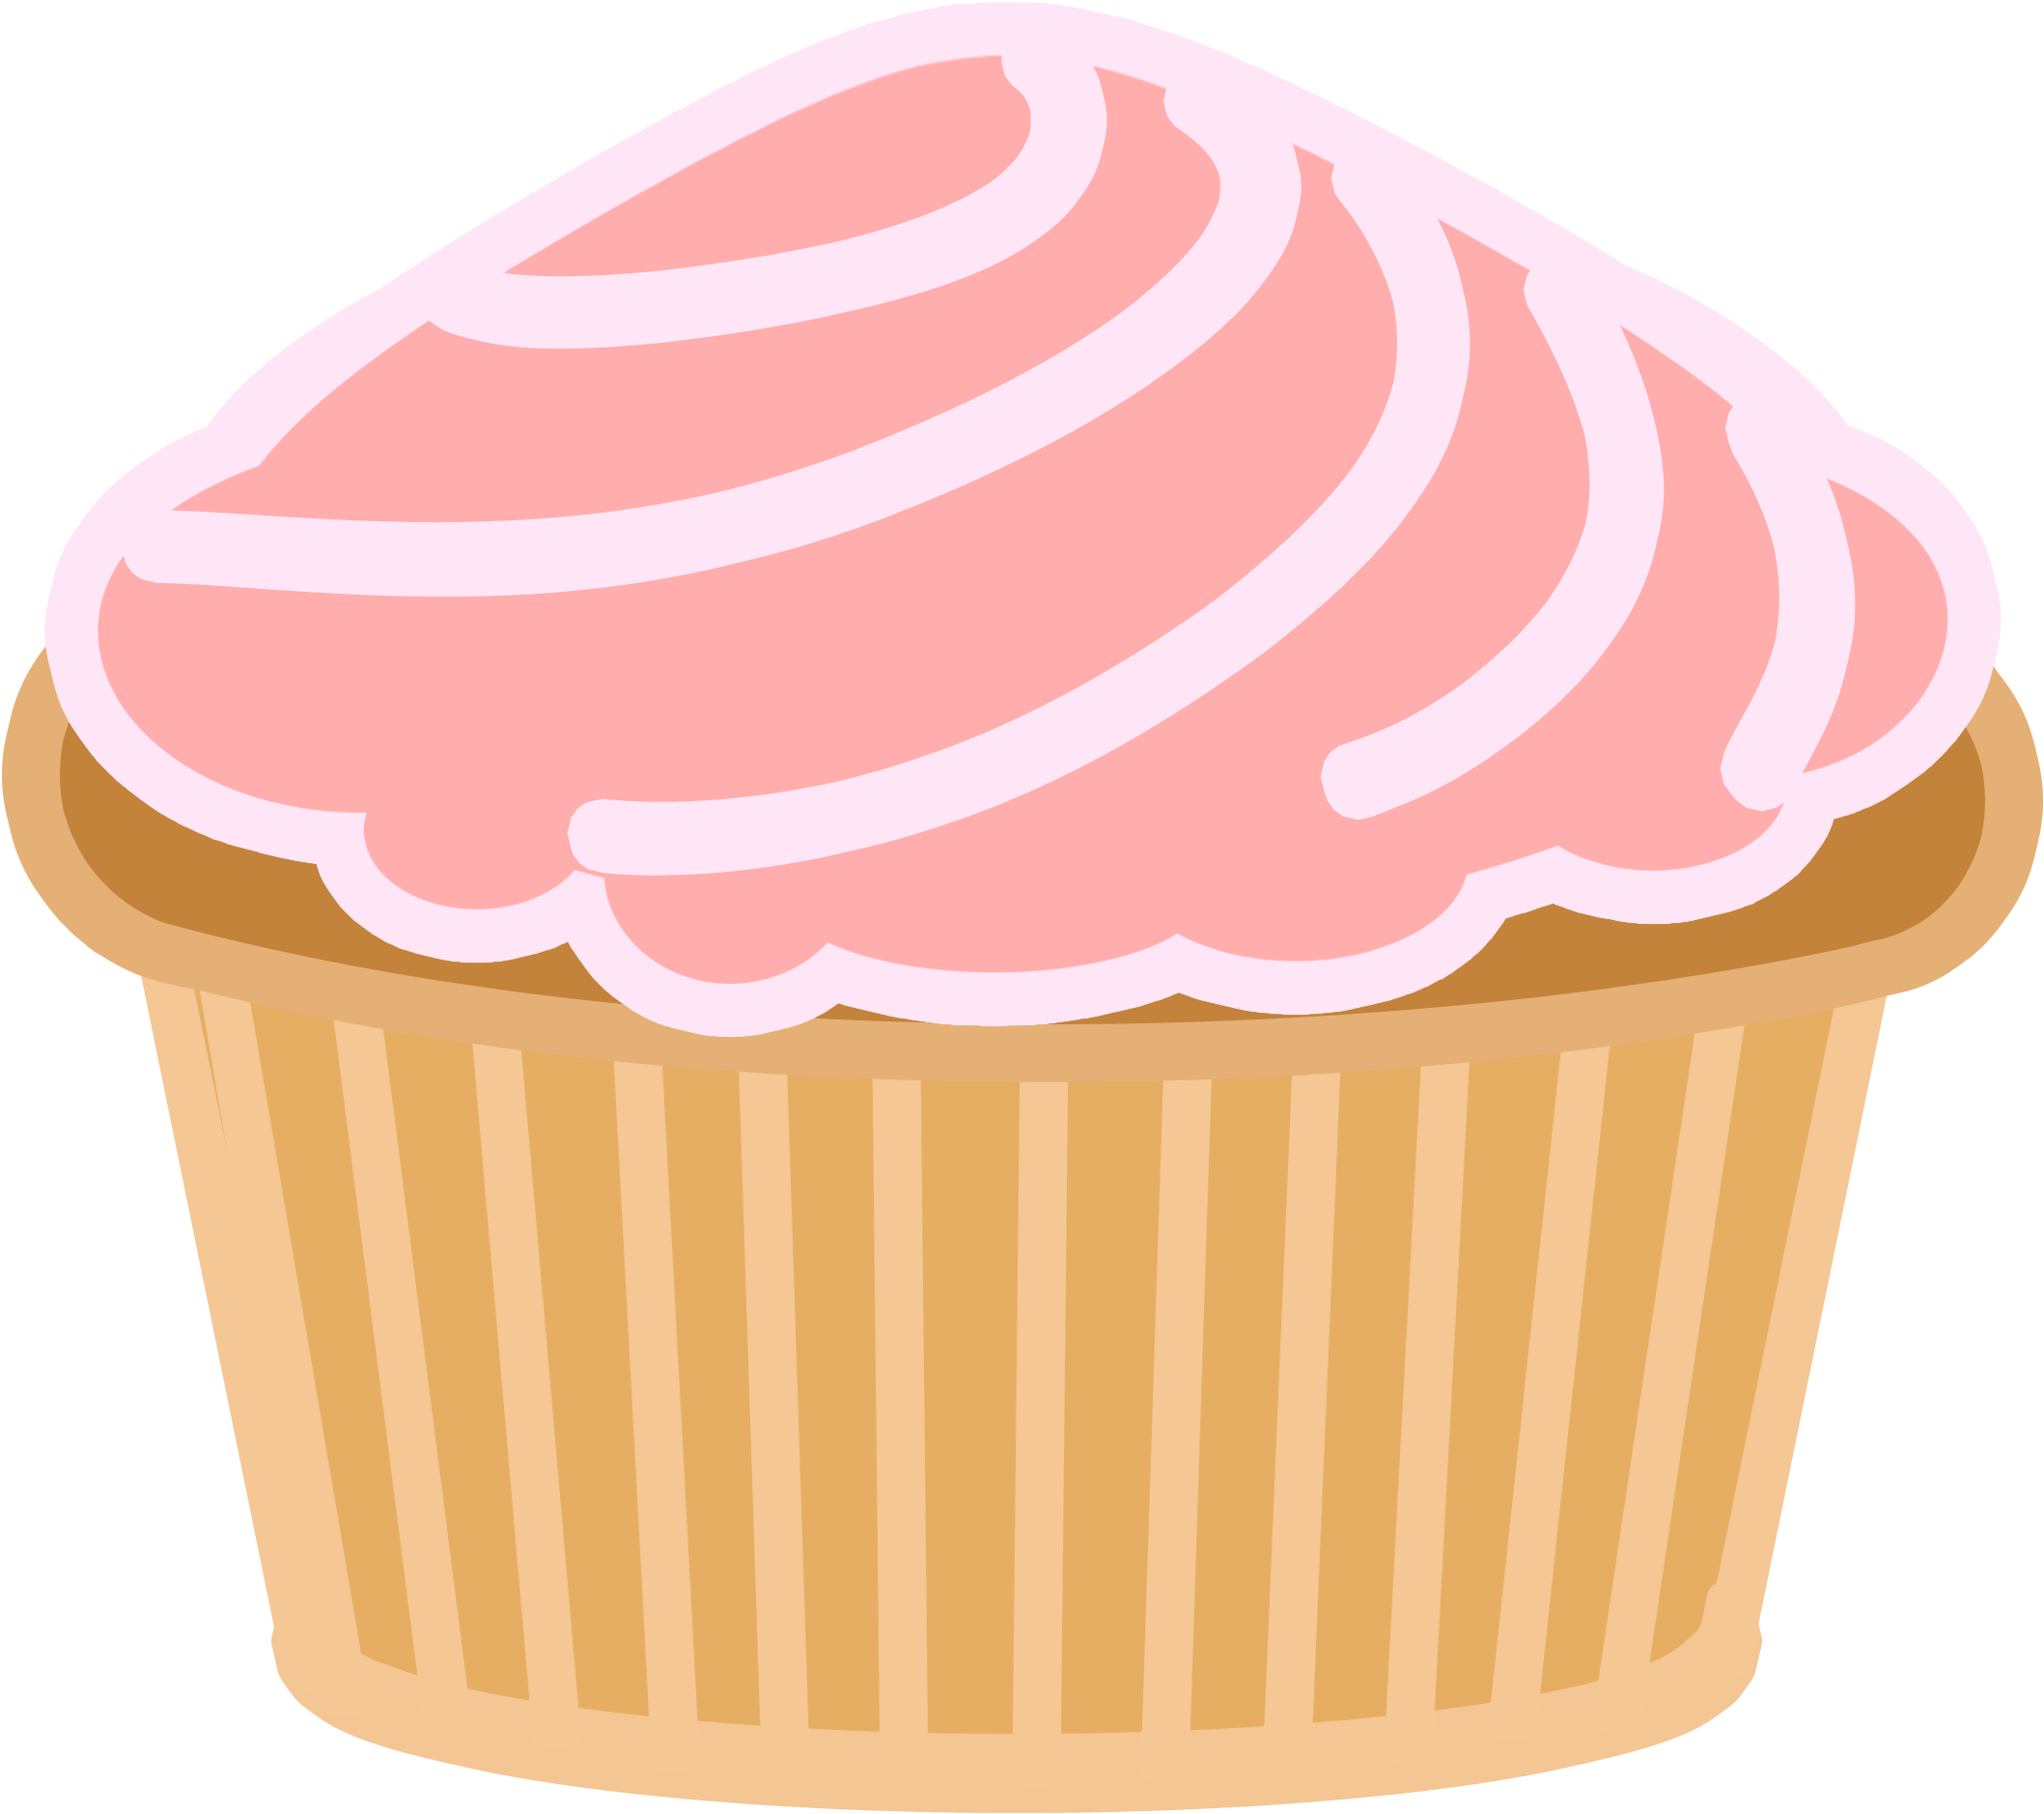 Pink Swirl Cupcake By Quick-stop On Clipart Library - Cup Cake Animation Png (3000x3000)